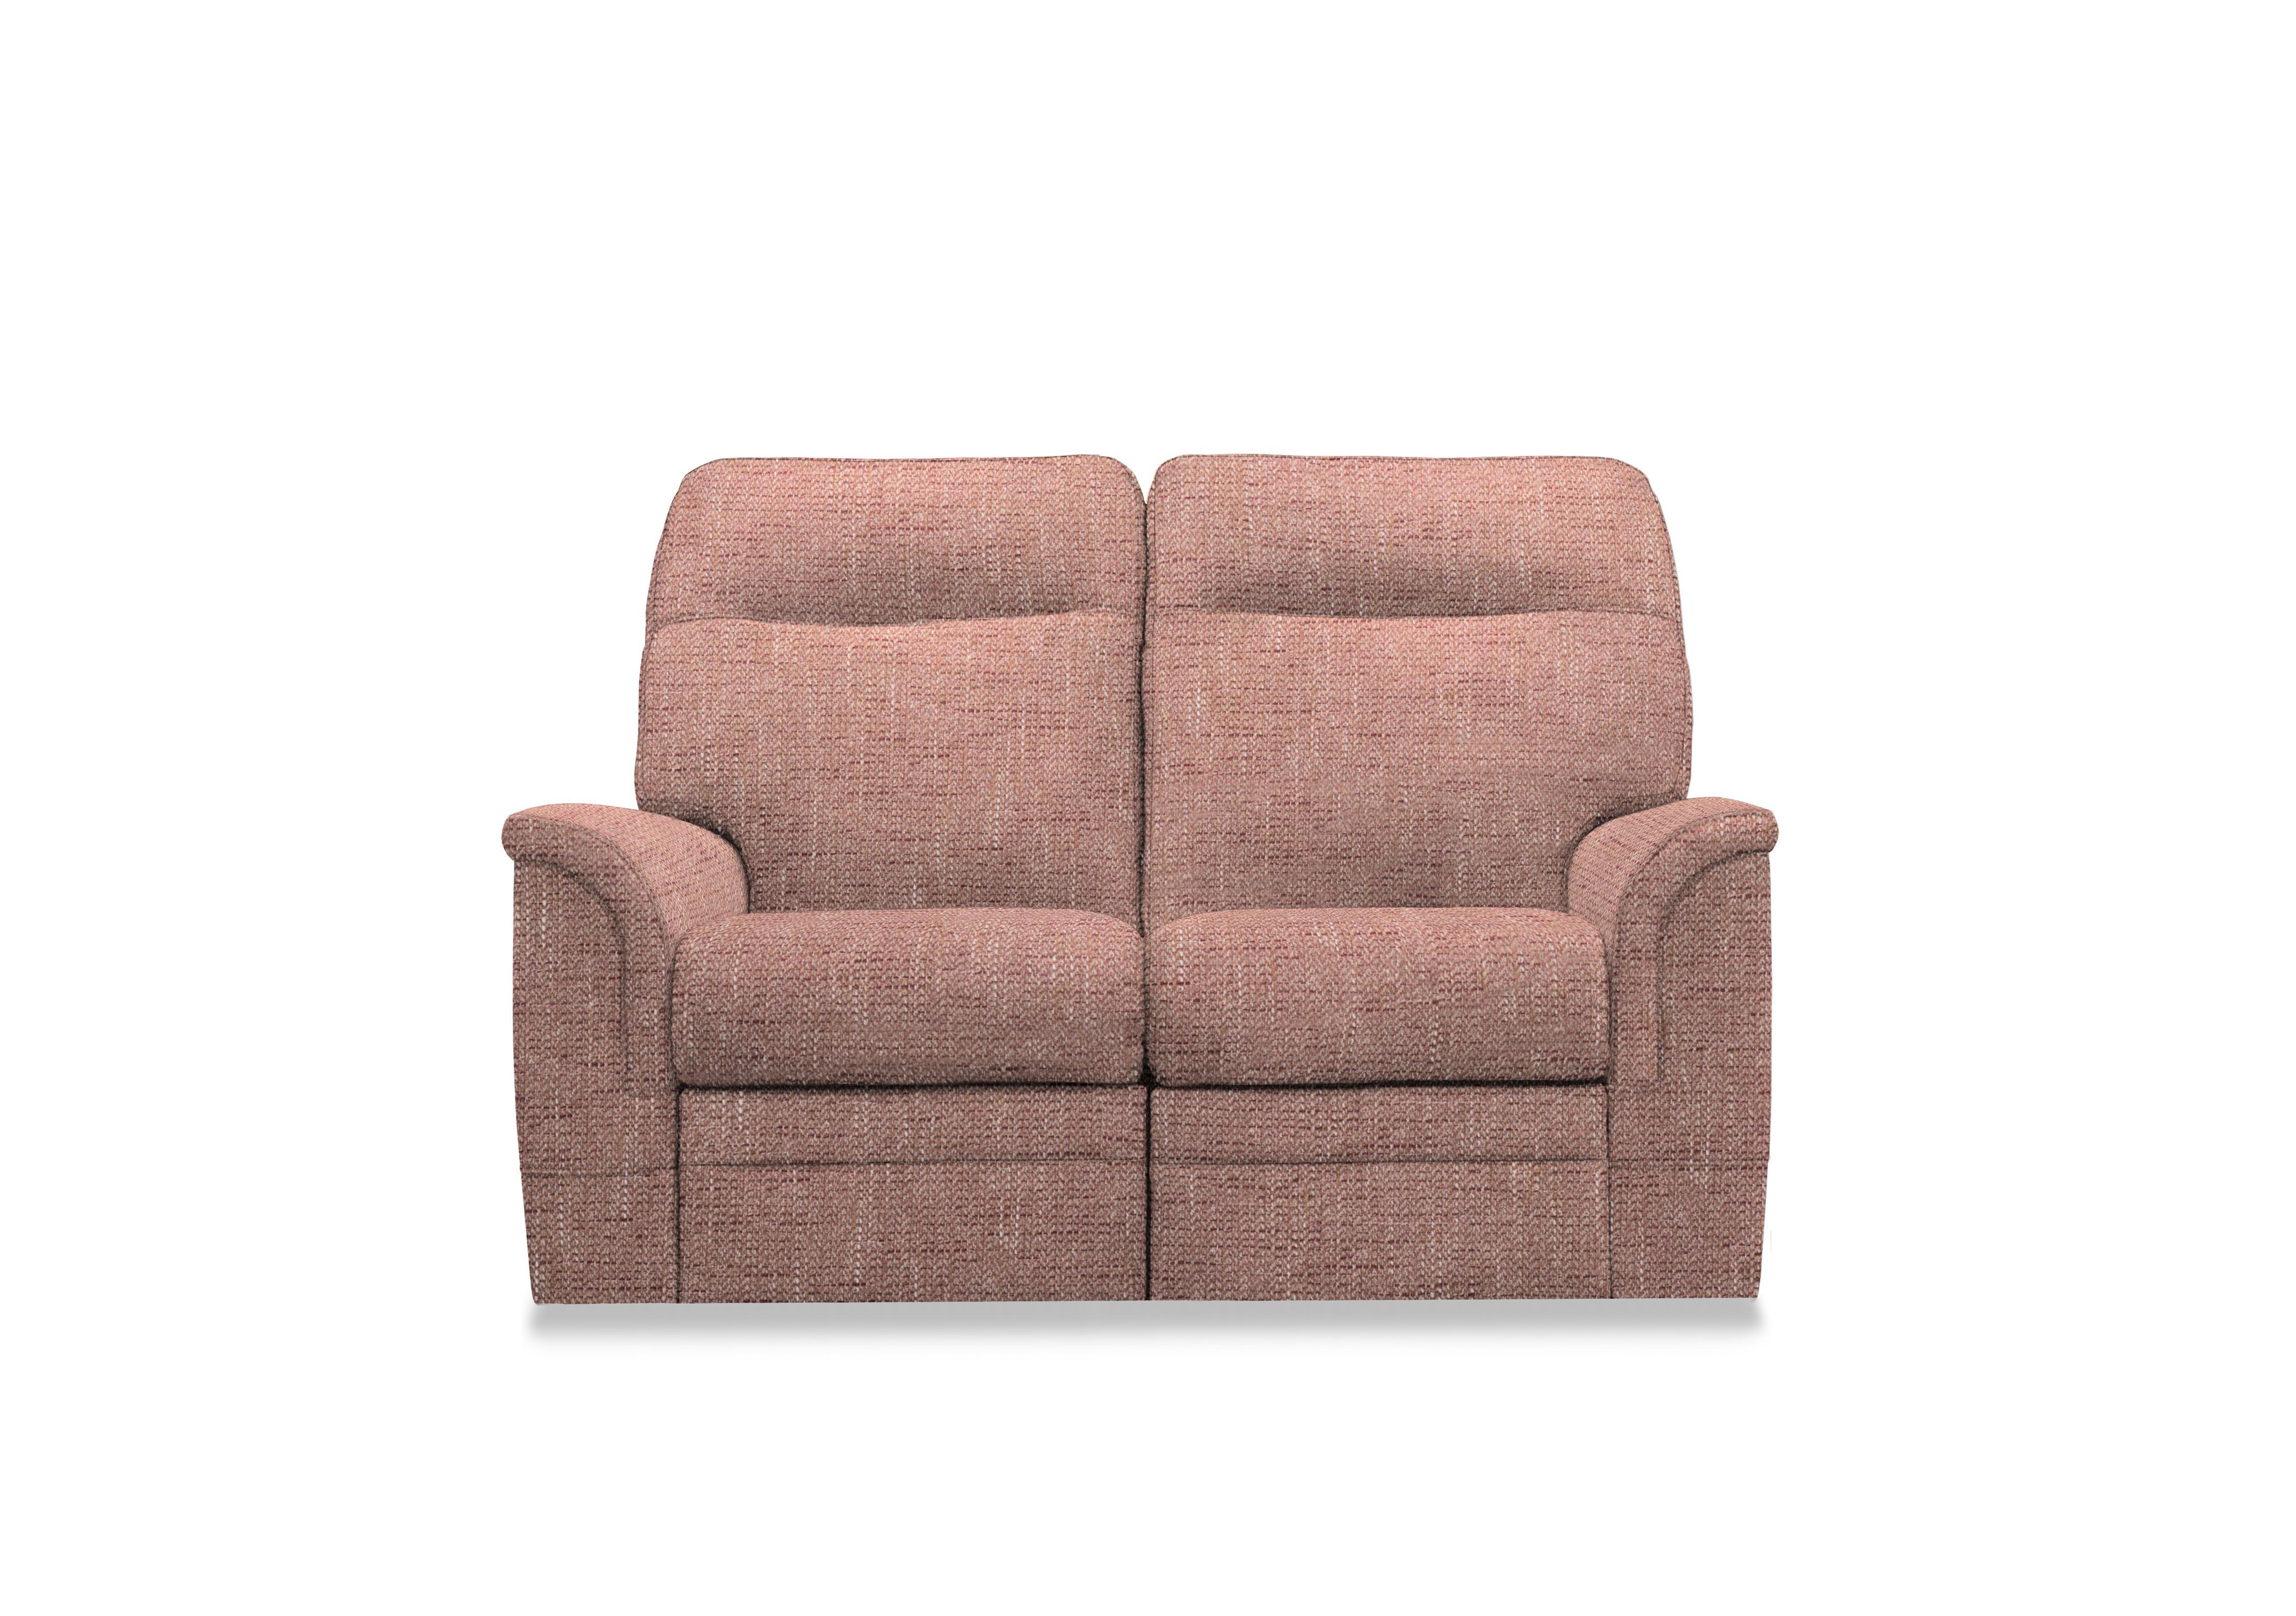 Hudson 23 Fabric 2 Seater Sofa in Country Rose 001409-0003 on Furniture Village